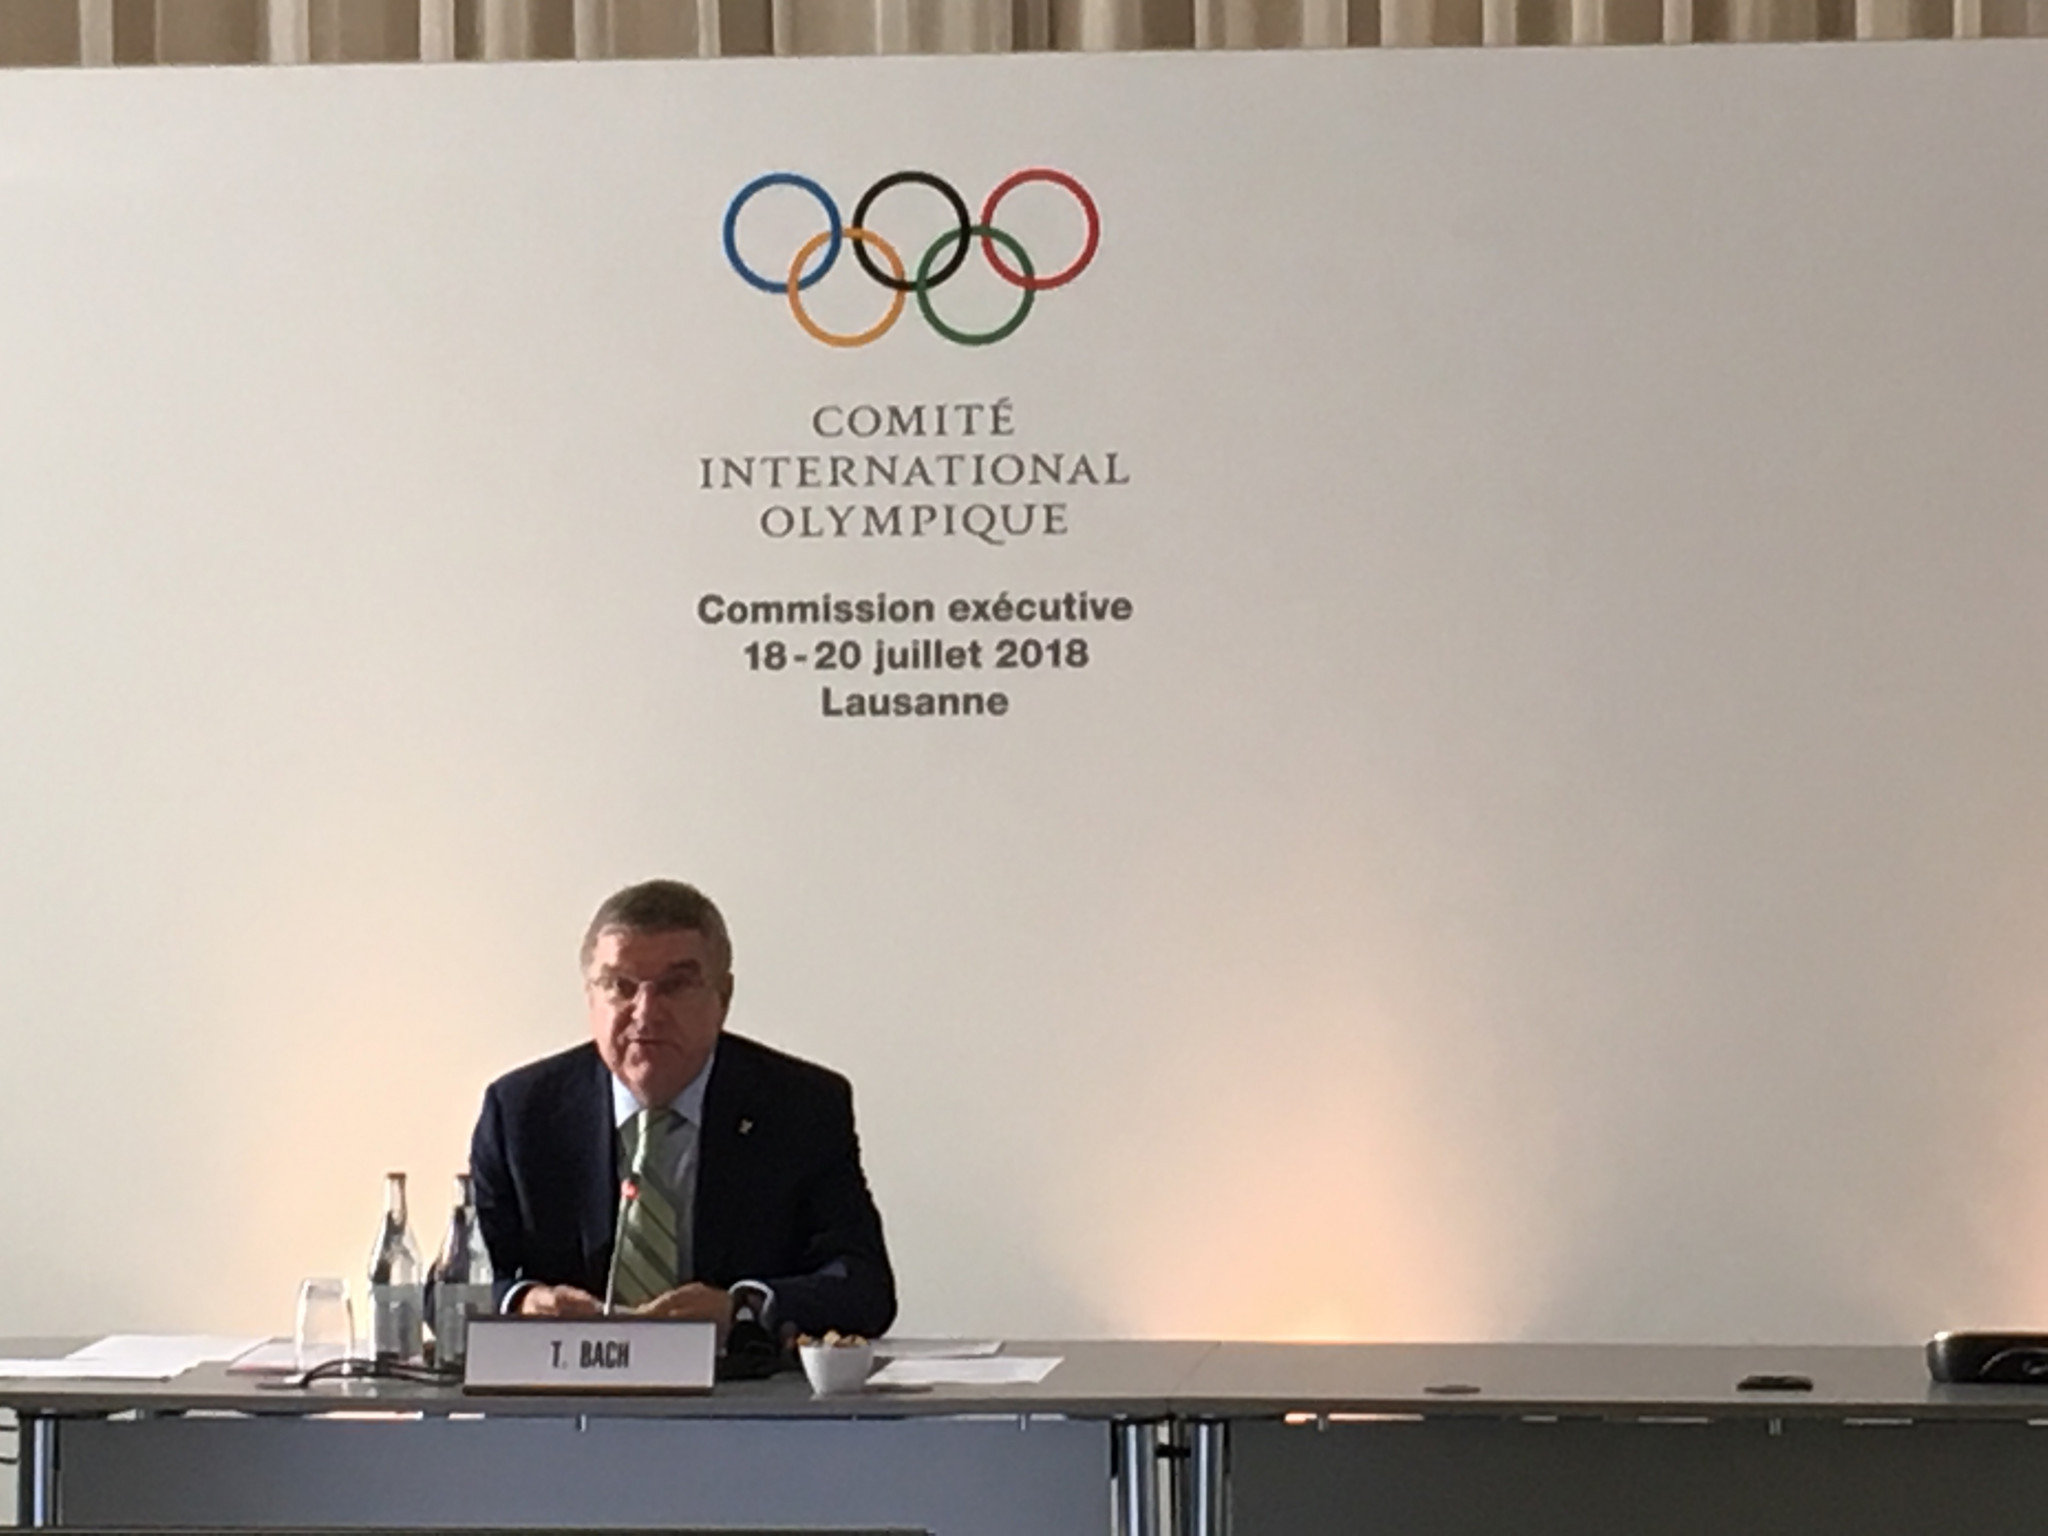 Bach claims IOC "not concerned" about state of 2026 Winter Olympic bid race but calls for streamlined process